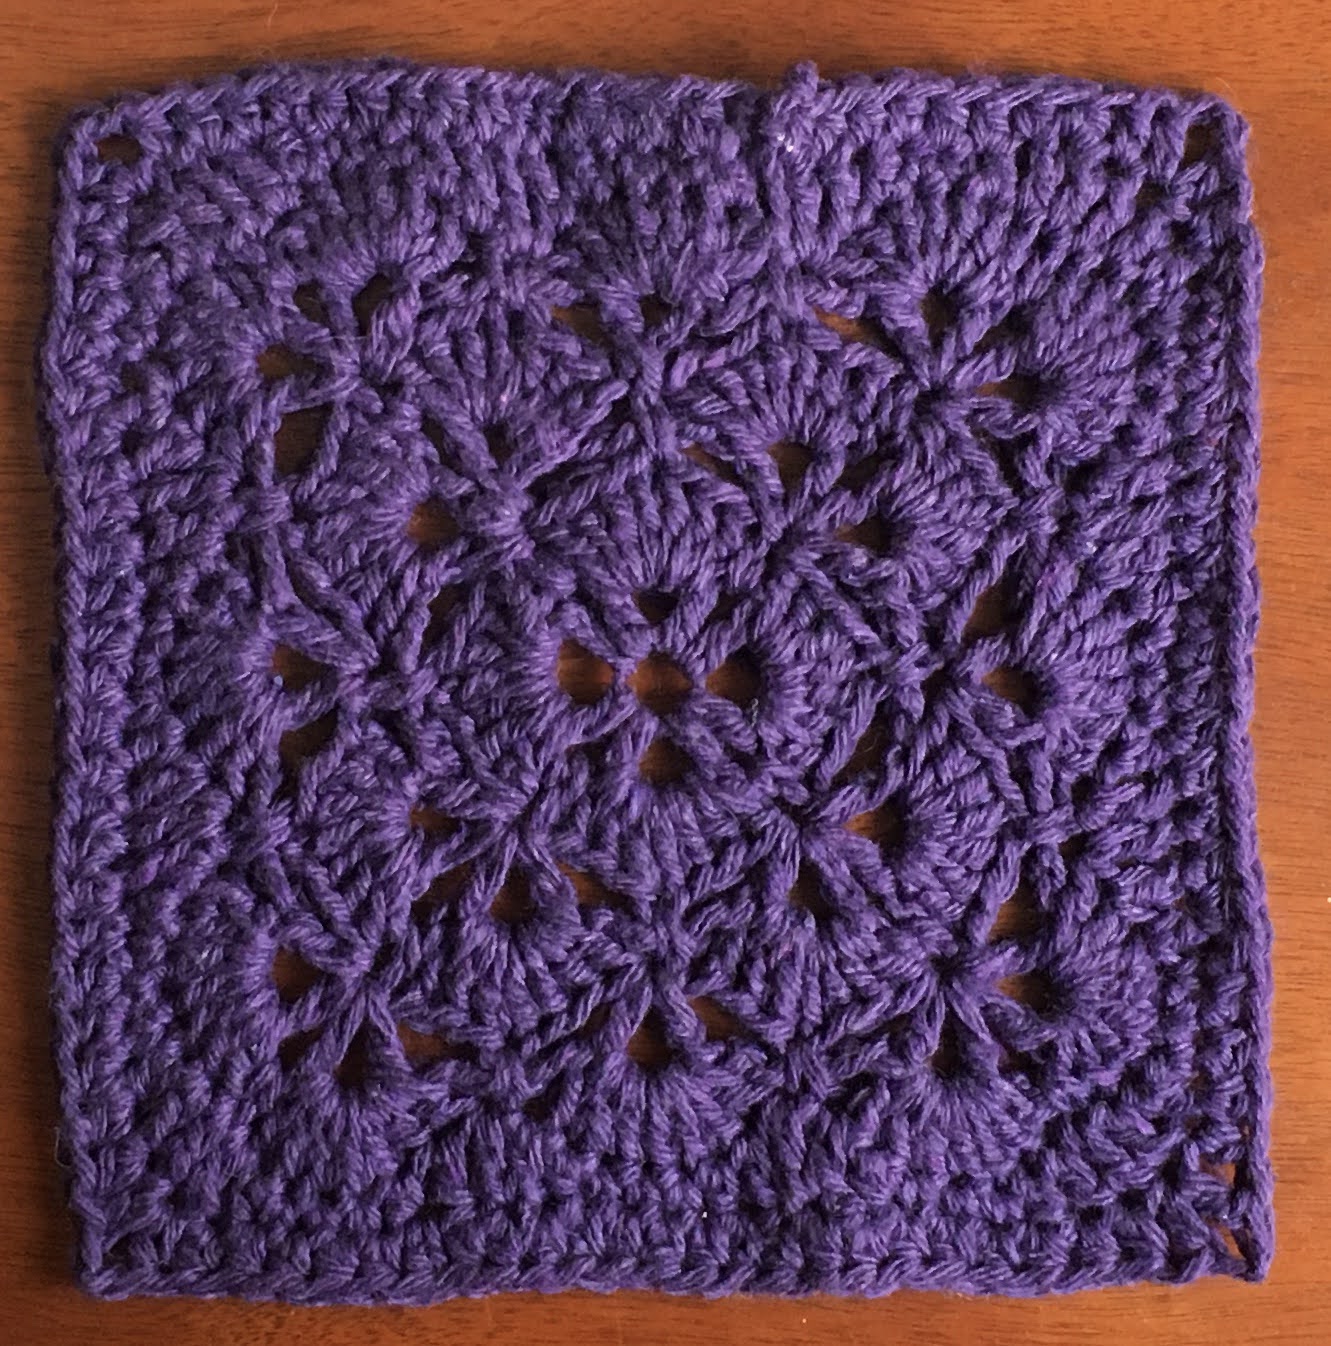 A deep purple crocheted square with a floral, fan-like design.